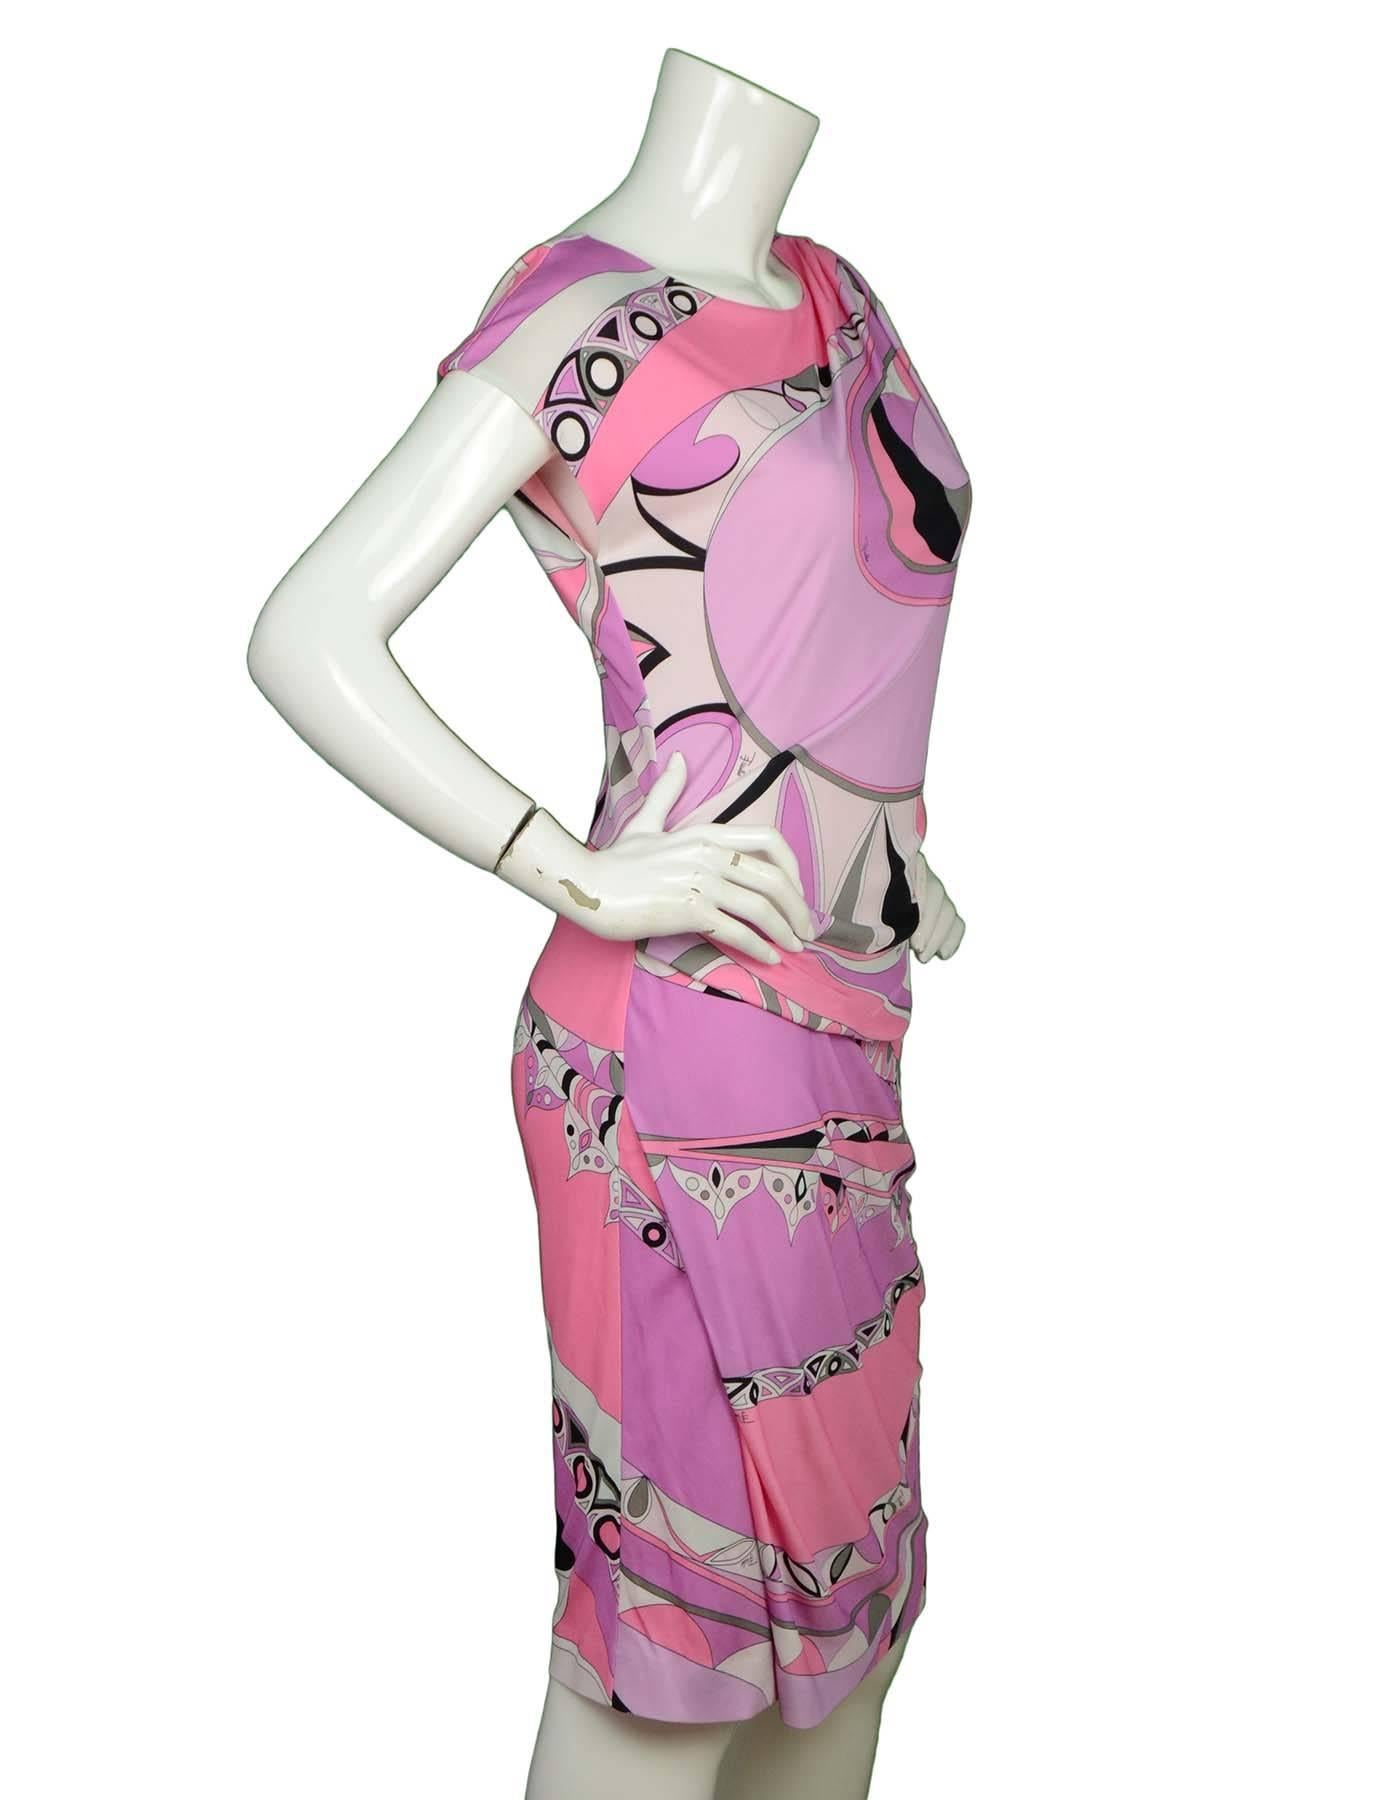 Emilio Pucci Pink and Lavender Dress Sz 10

Features cap sleeves

Made In: Italy
Color: Pink, lavender and black
Composition: 100% Rayon
Lining: Pink under slip
Closure/Opening: Zipper closure at back
Exterior Pockets: None
Interior